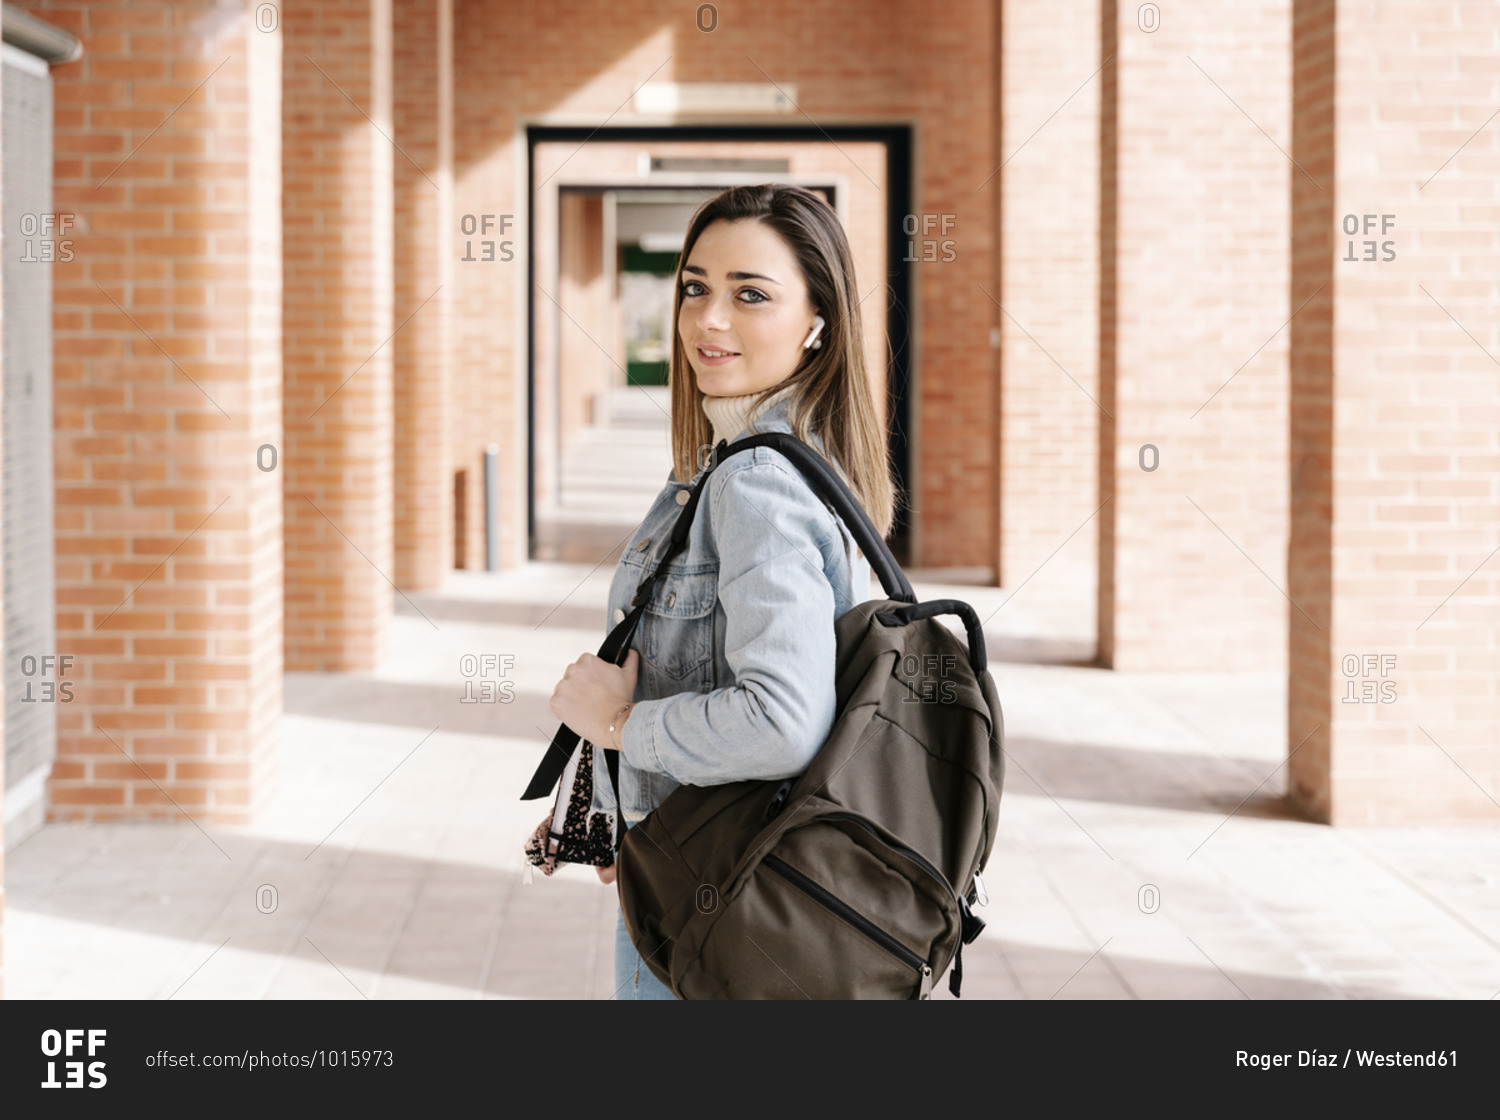 Smiling university student with bag and book standing in campus